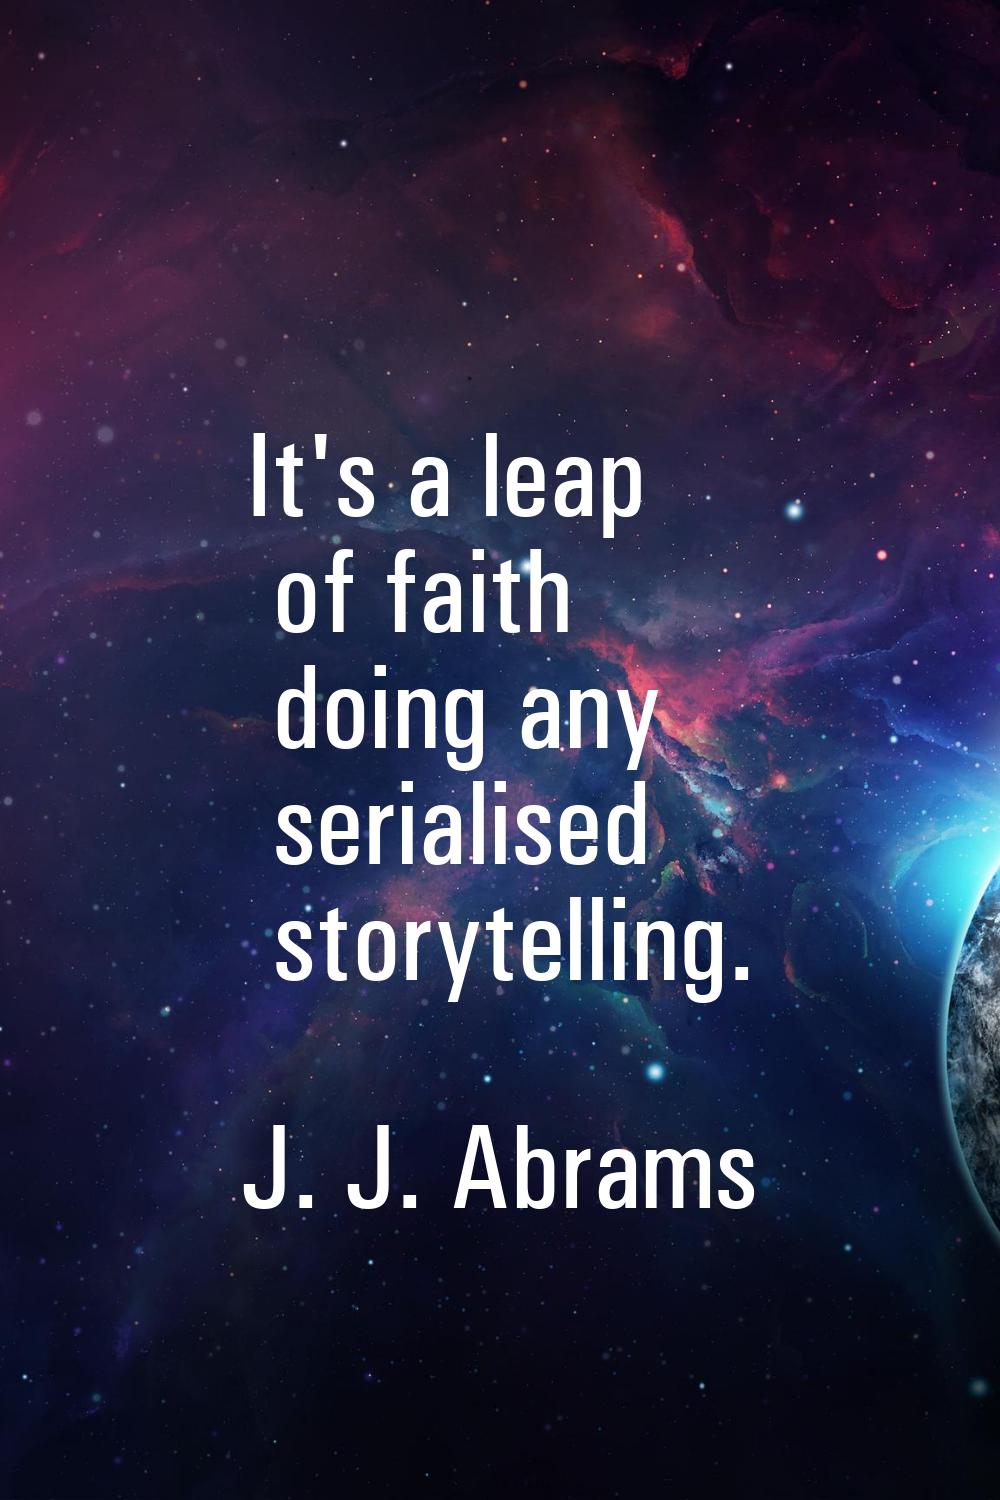 It's a leap of faith doing any serialised storytelling.